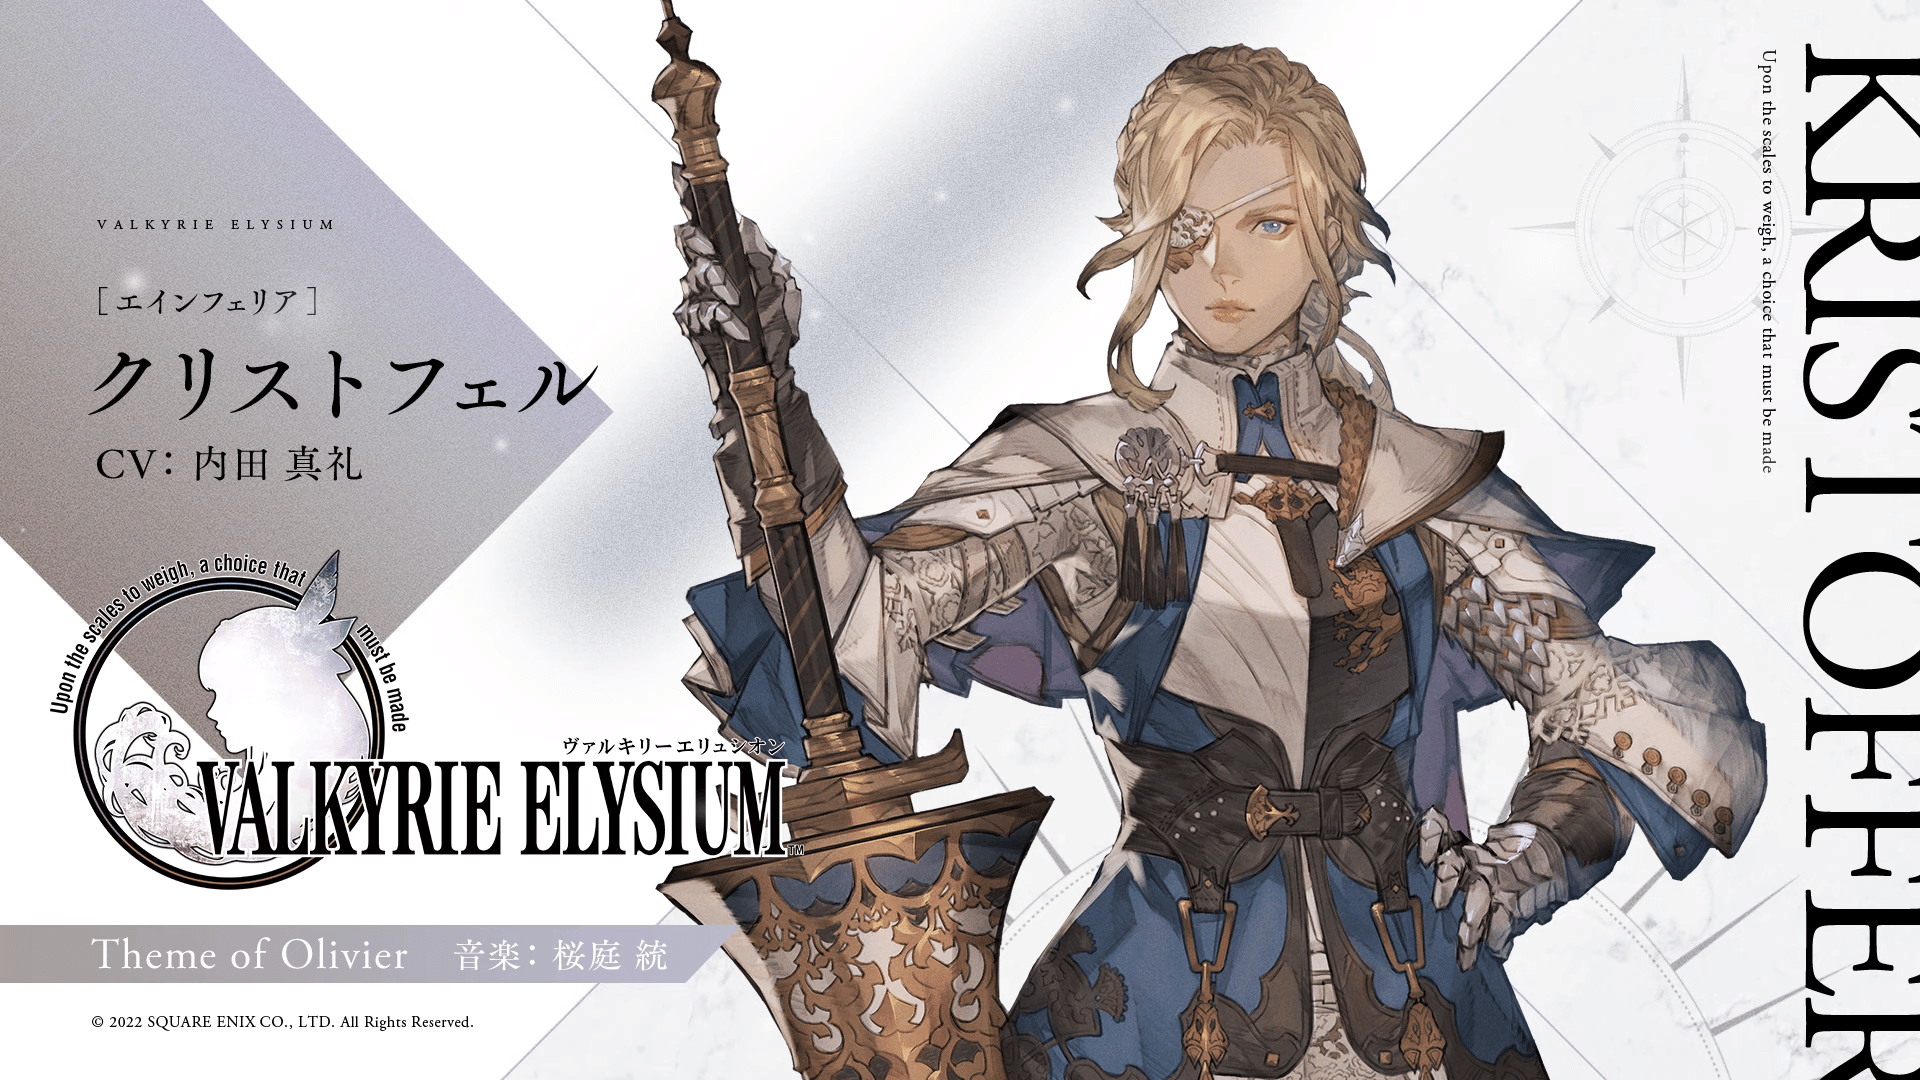 Valkyrie Elysium Shares Countdown BGM Leading Up to Release; “Theme of Olivier”